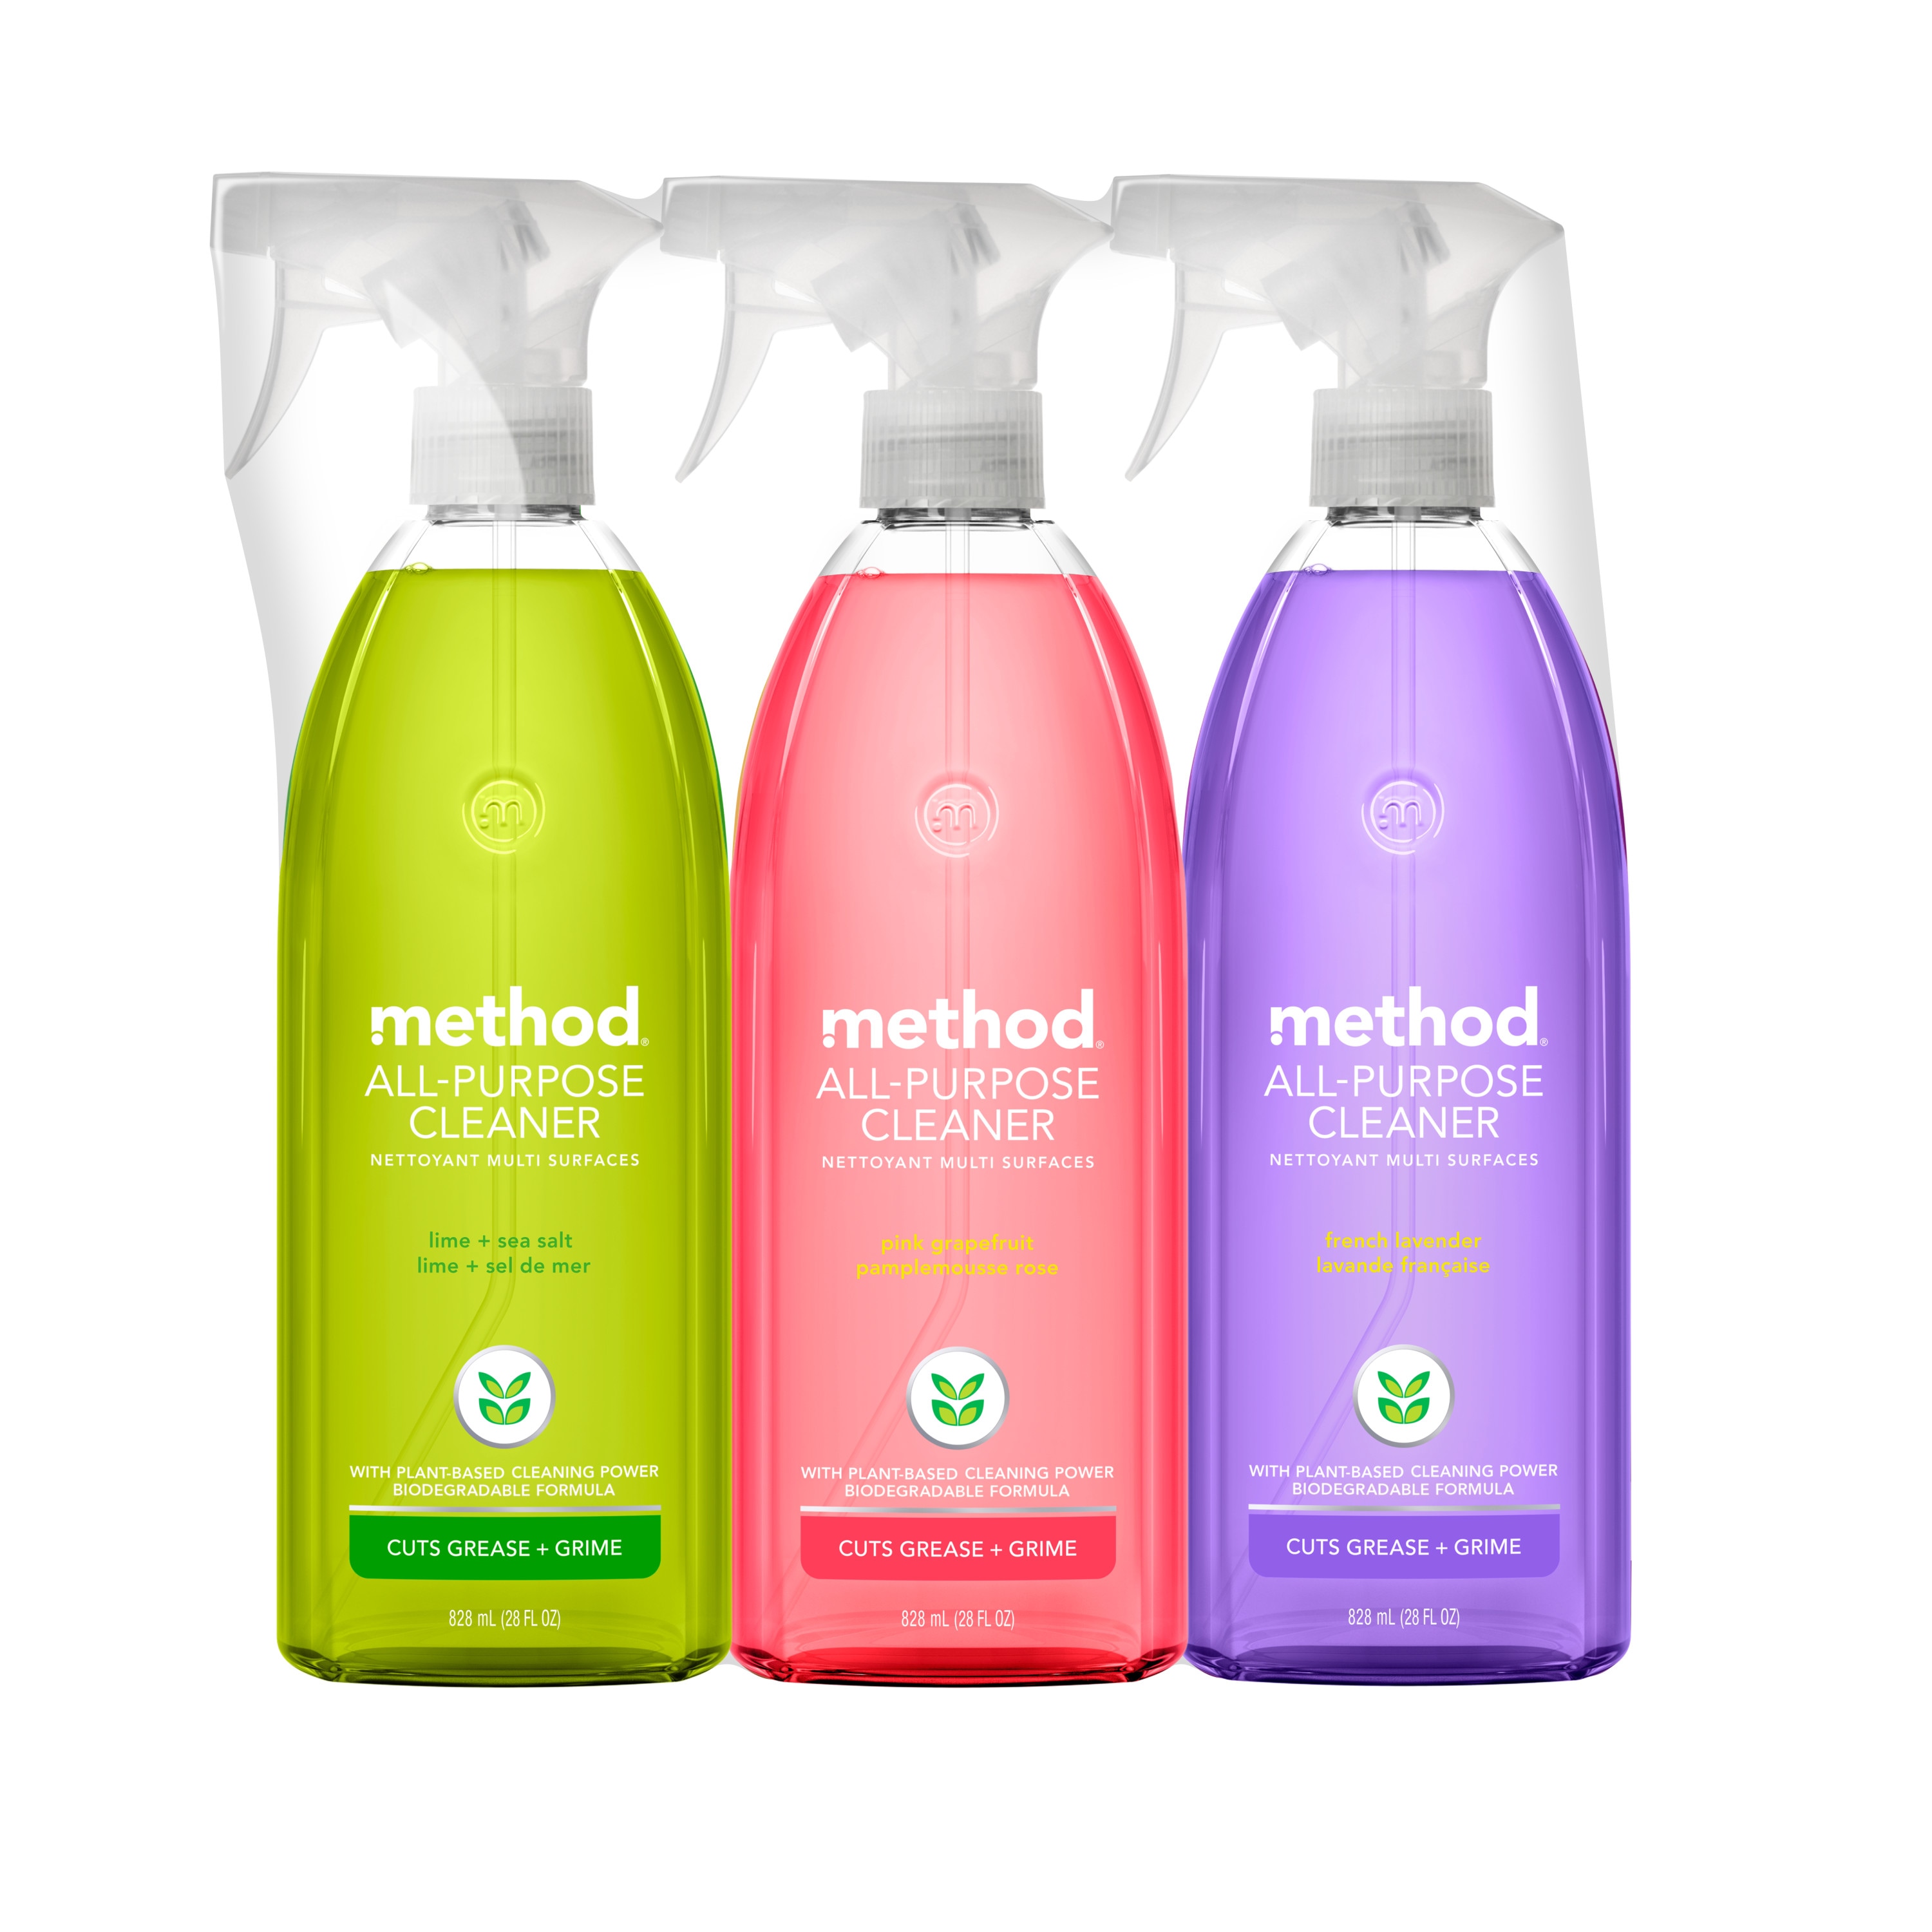 method 70-Count French Lavender Wipes All-Purpose Cleaner